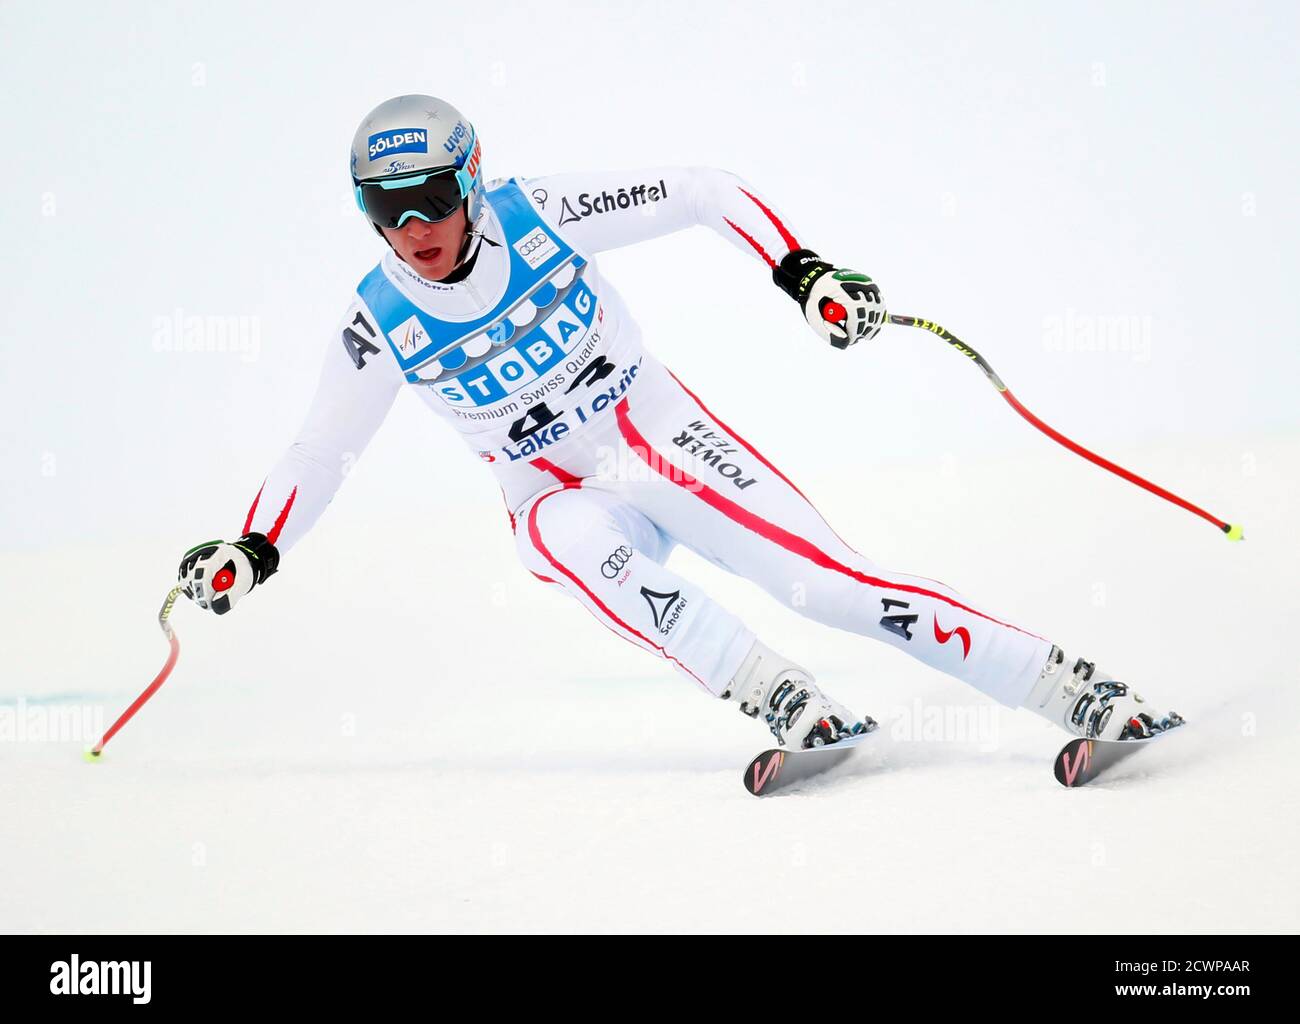 Florian Sheiber of Austria makes a turn during alpine skiing training for the Men's World Cup downhill in Lake Louise, Alberta November 21, 2012.  REUTERS/Mike Blake  (CANADA - Tags: SPORT SKIING) Stock Photo